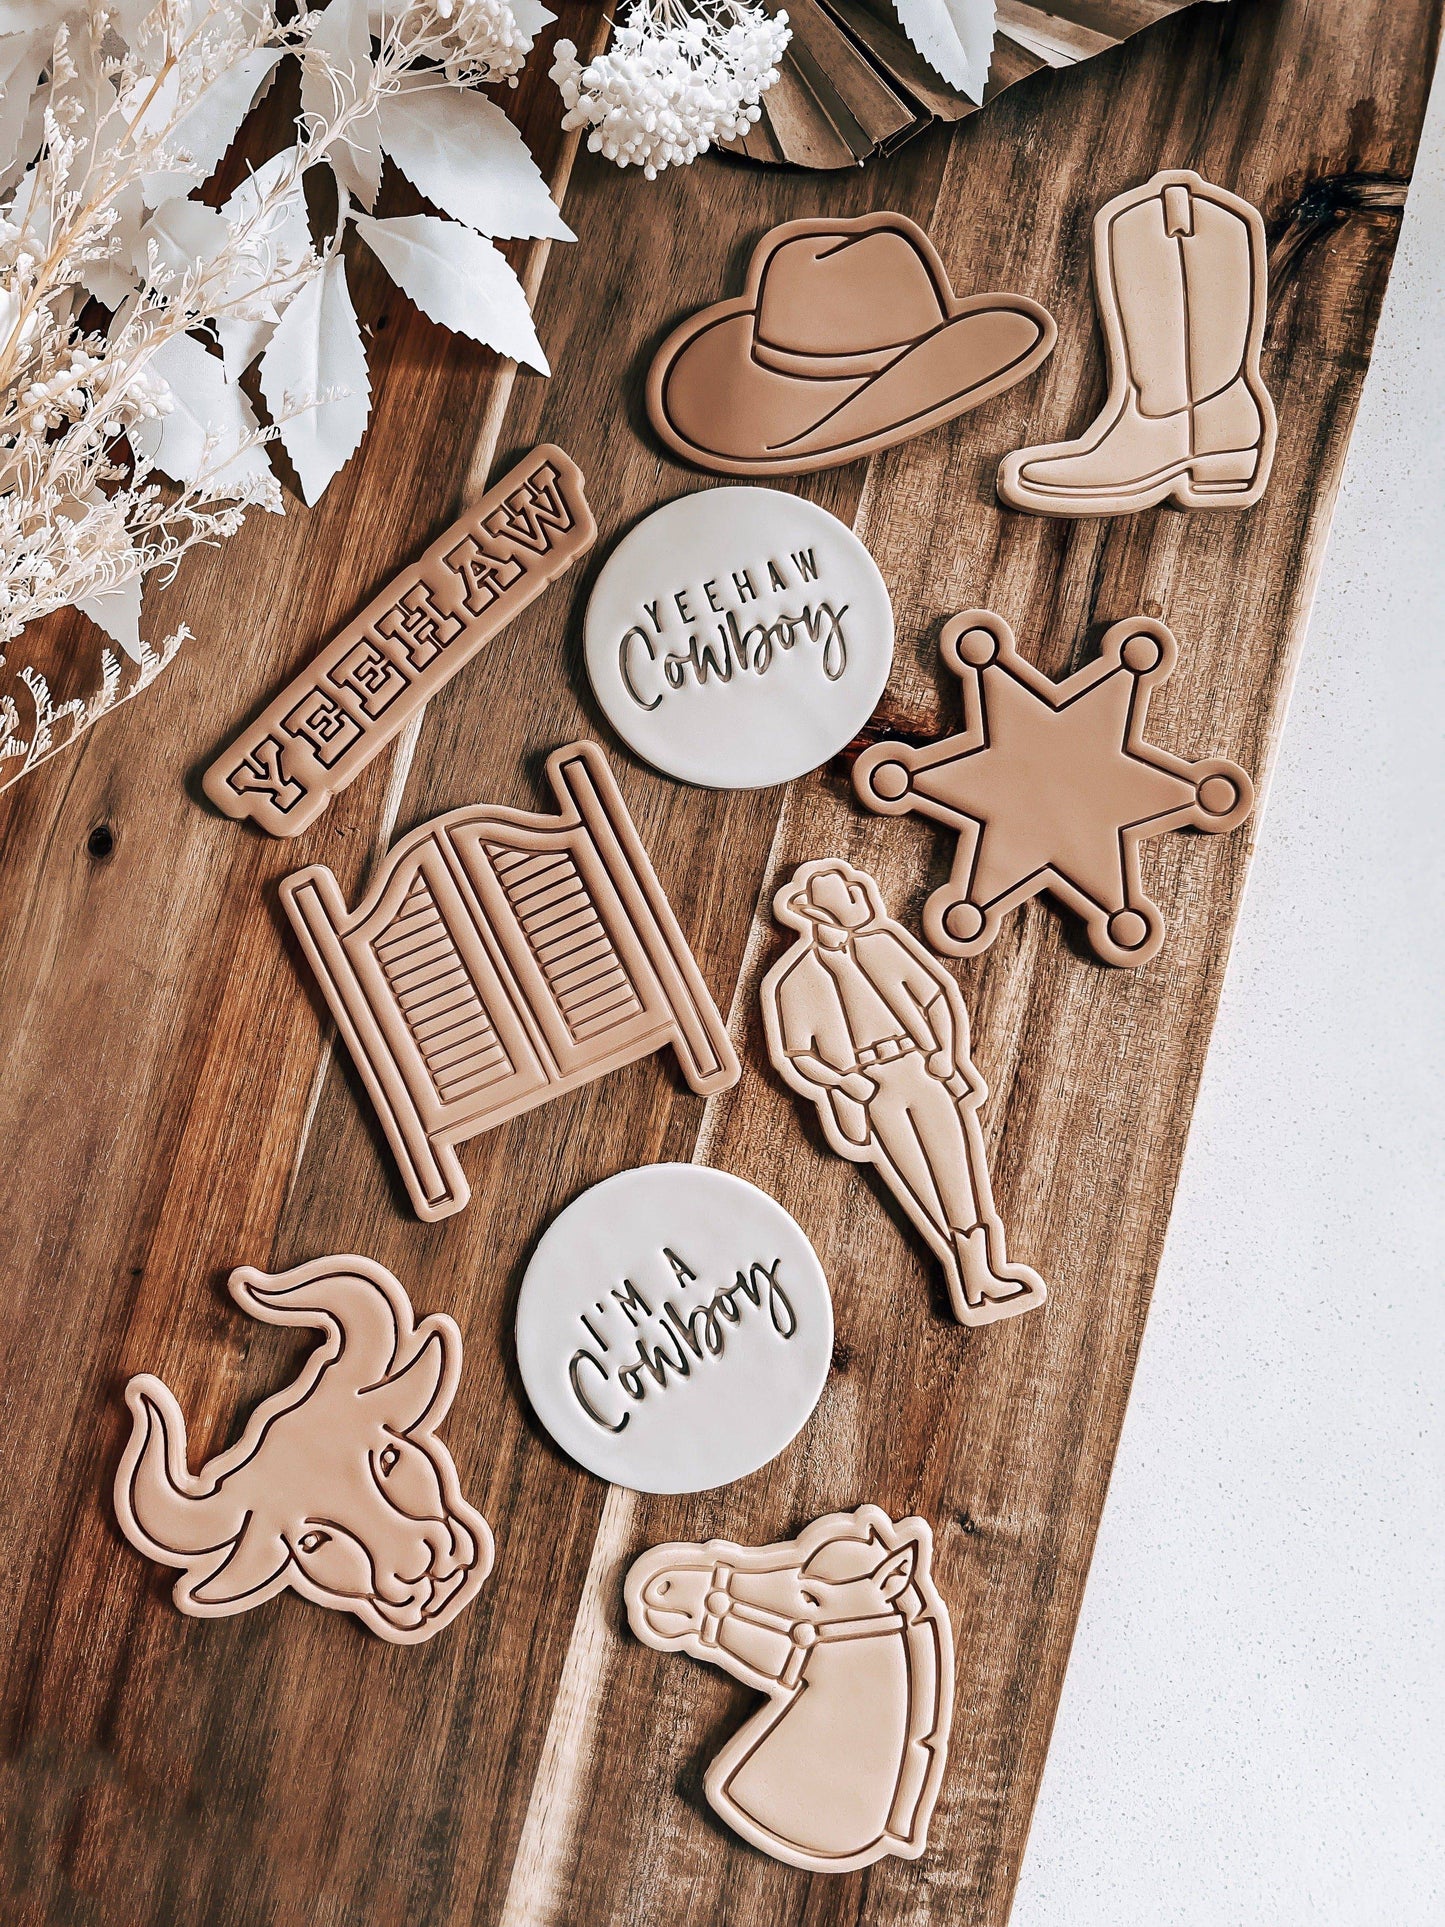 Boot (Cowboy) - Cookie Stamp and Cutter - O'Khach Baking Supplies